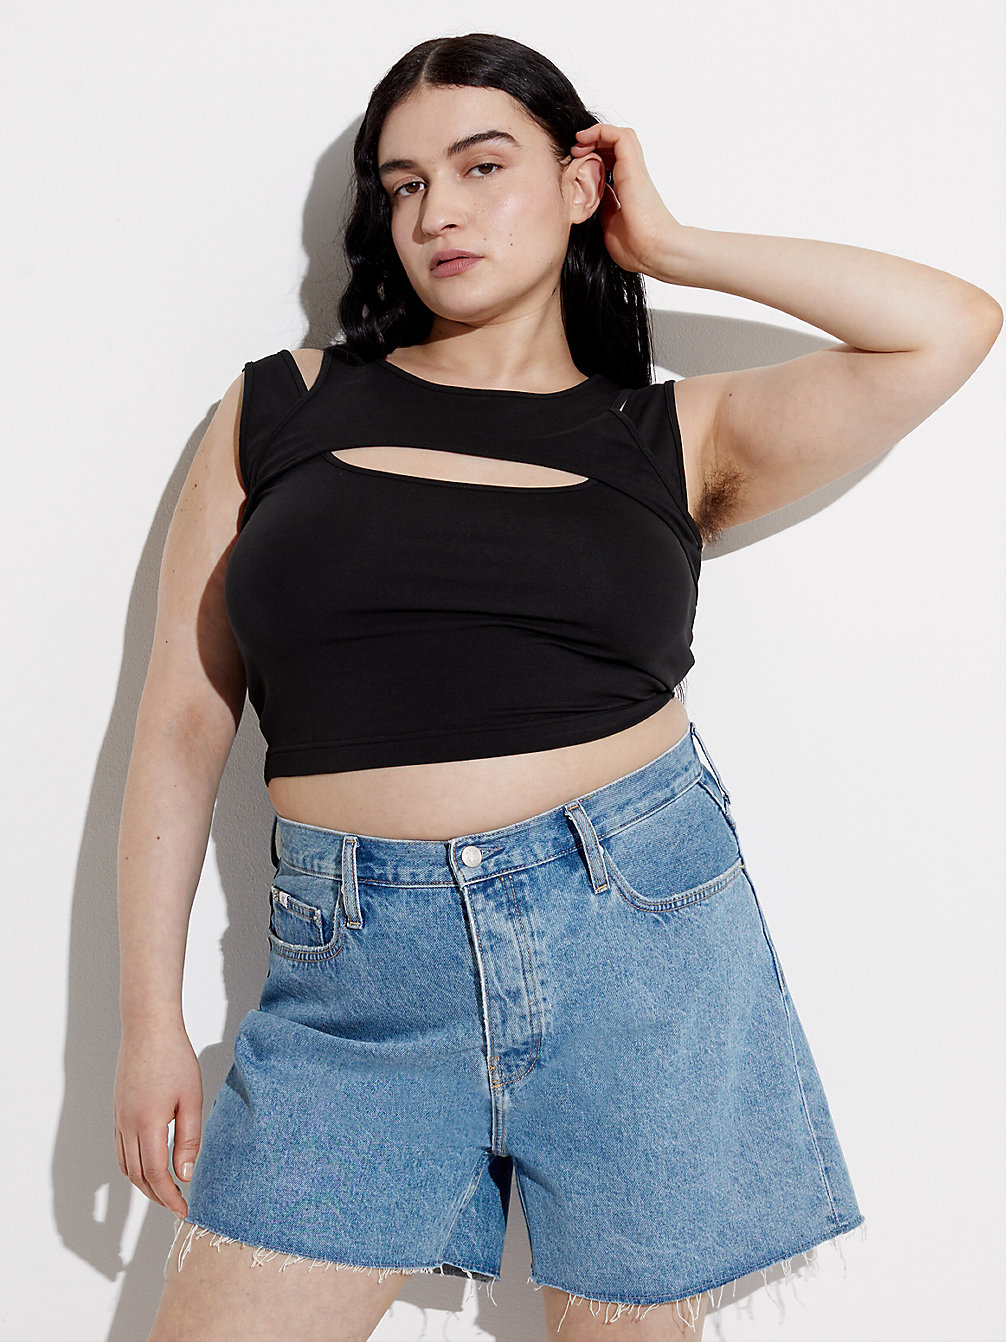 CK BLACK Cropped Cut Out Tank Top - Pride undefined women Calvin Klein